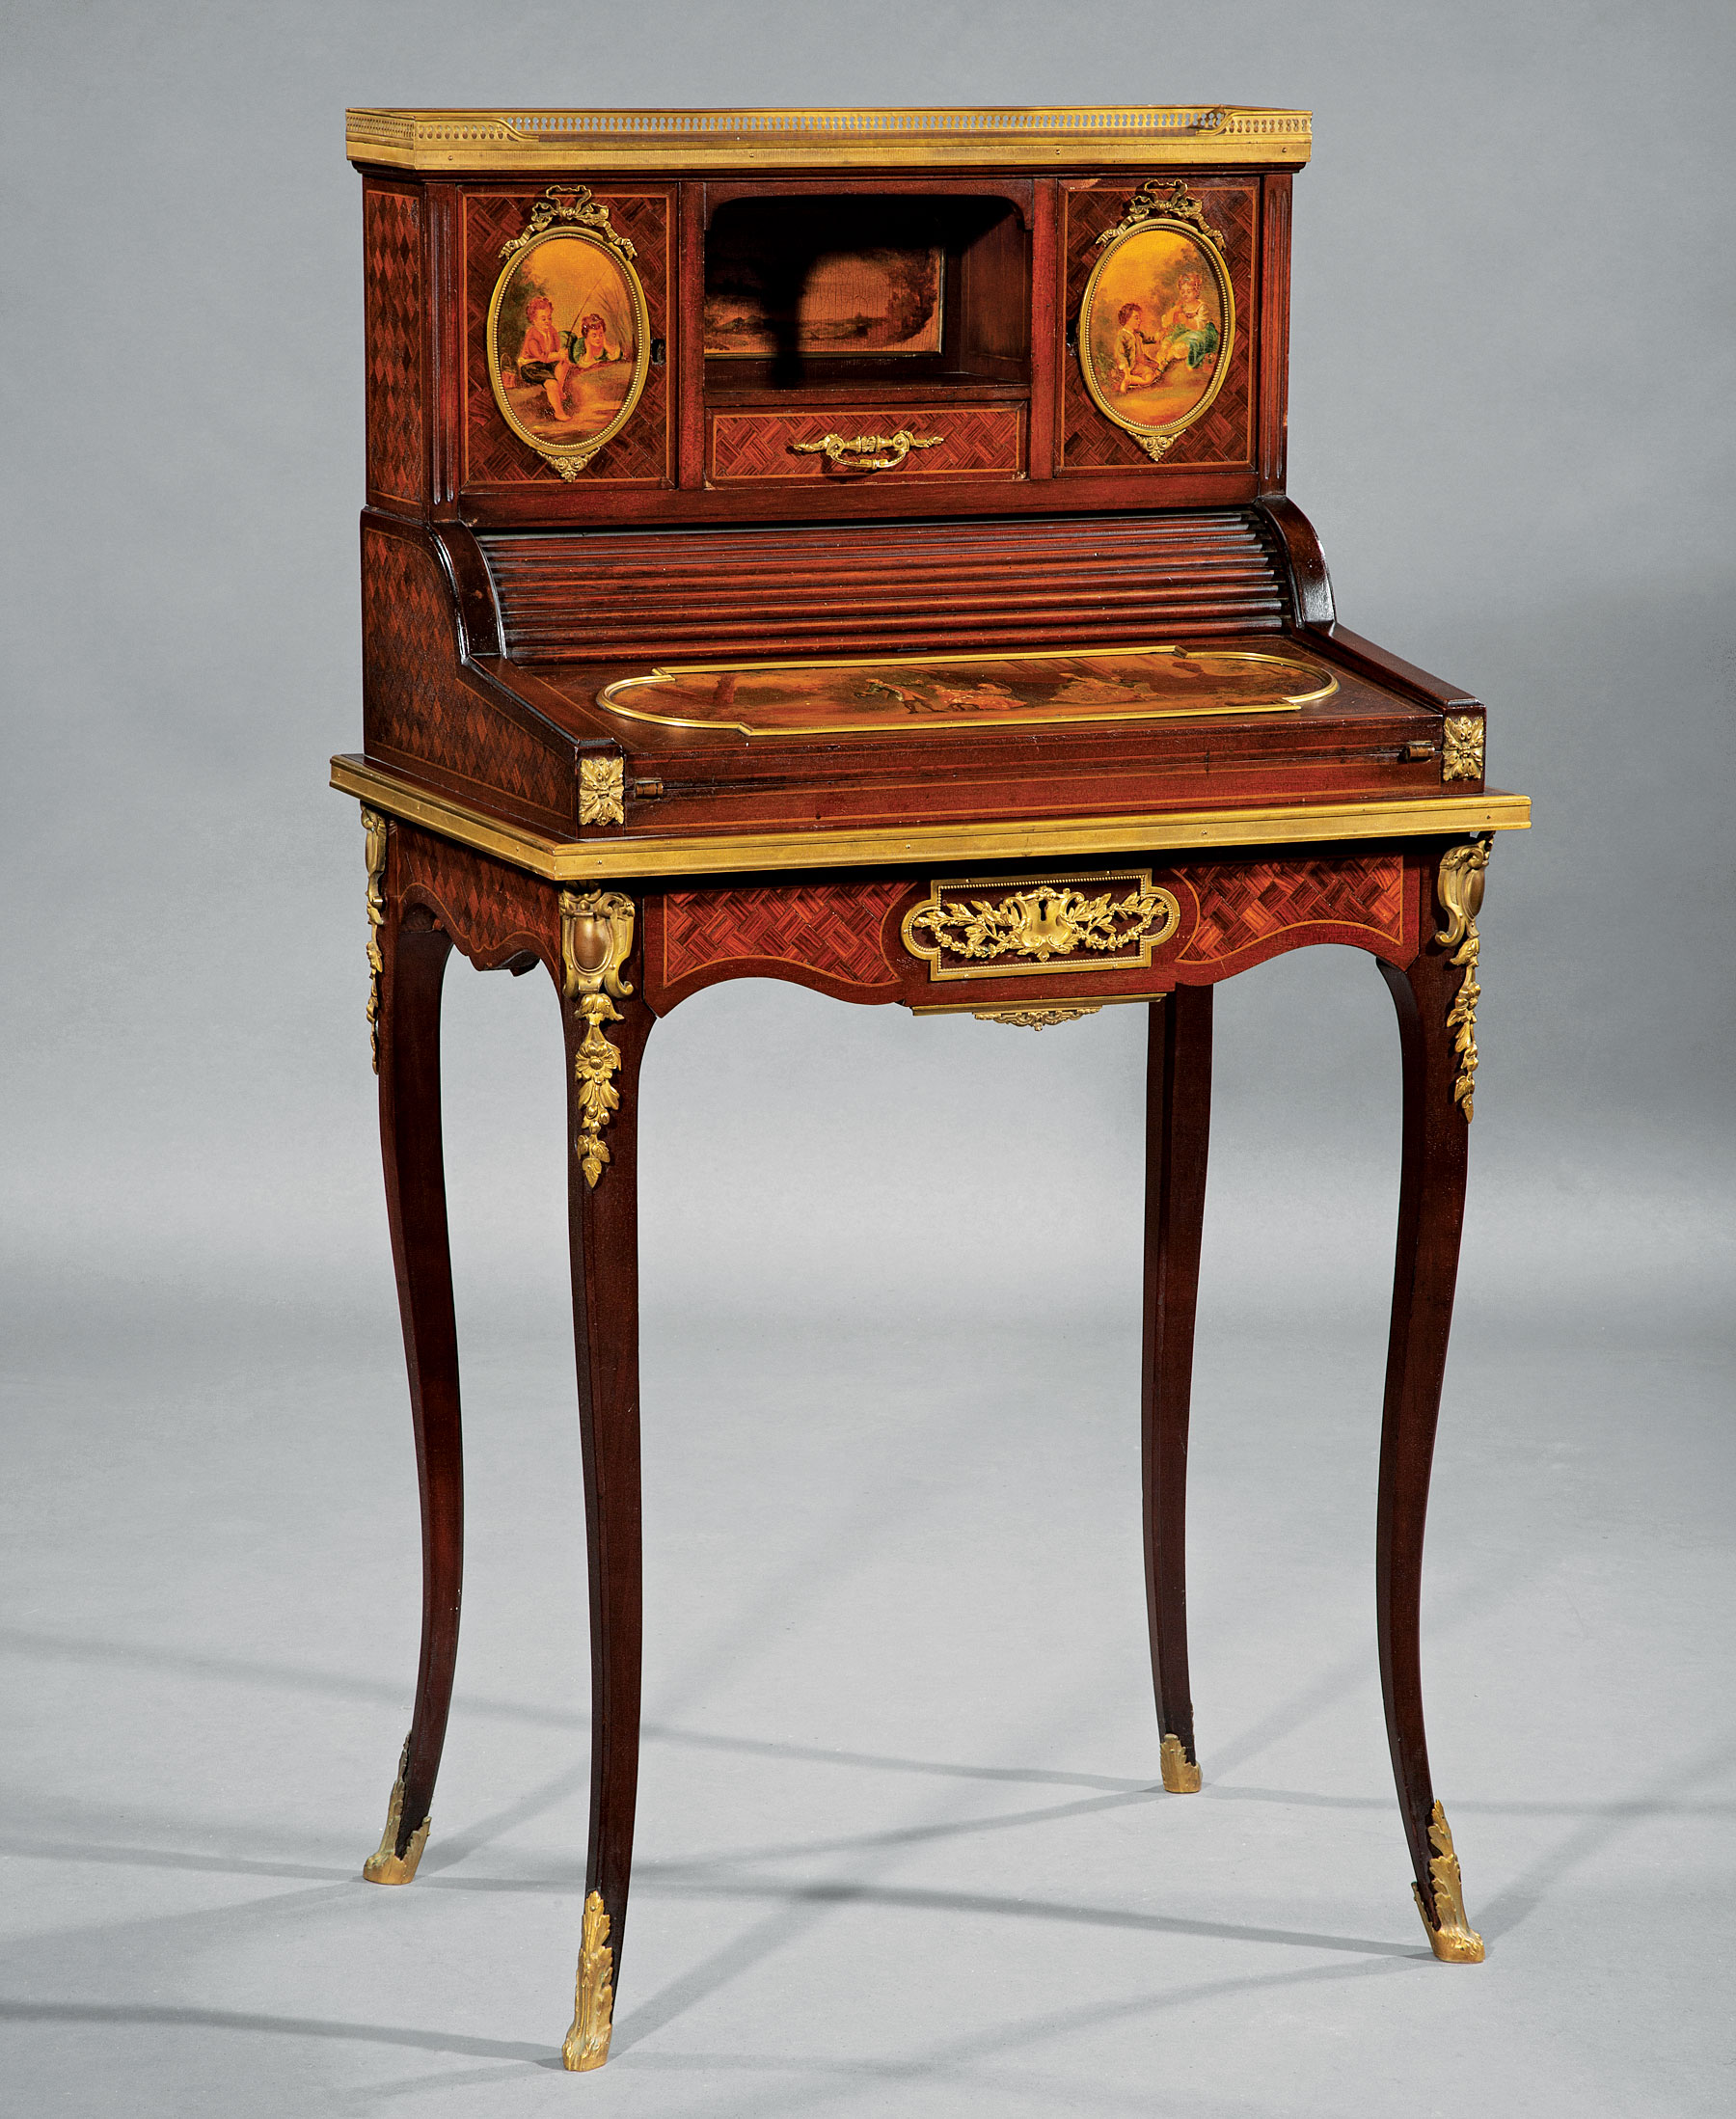 Louis XVI-Style Bronze-Mounted, Painted, Parquetry and Marquetry Escritoire , galleried fitted